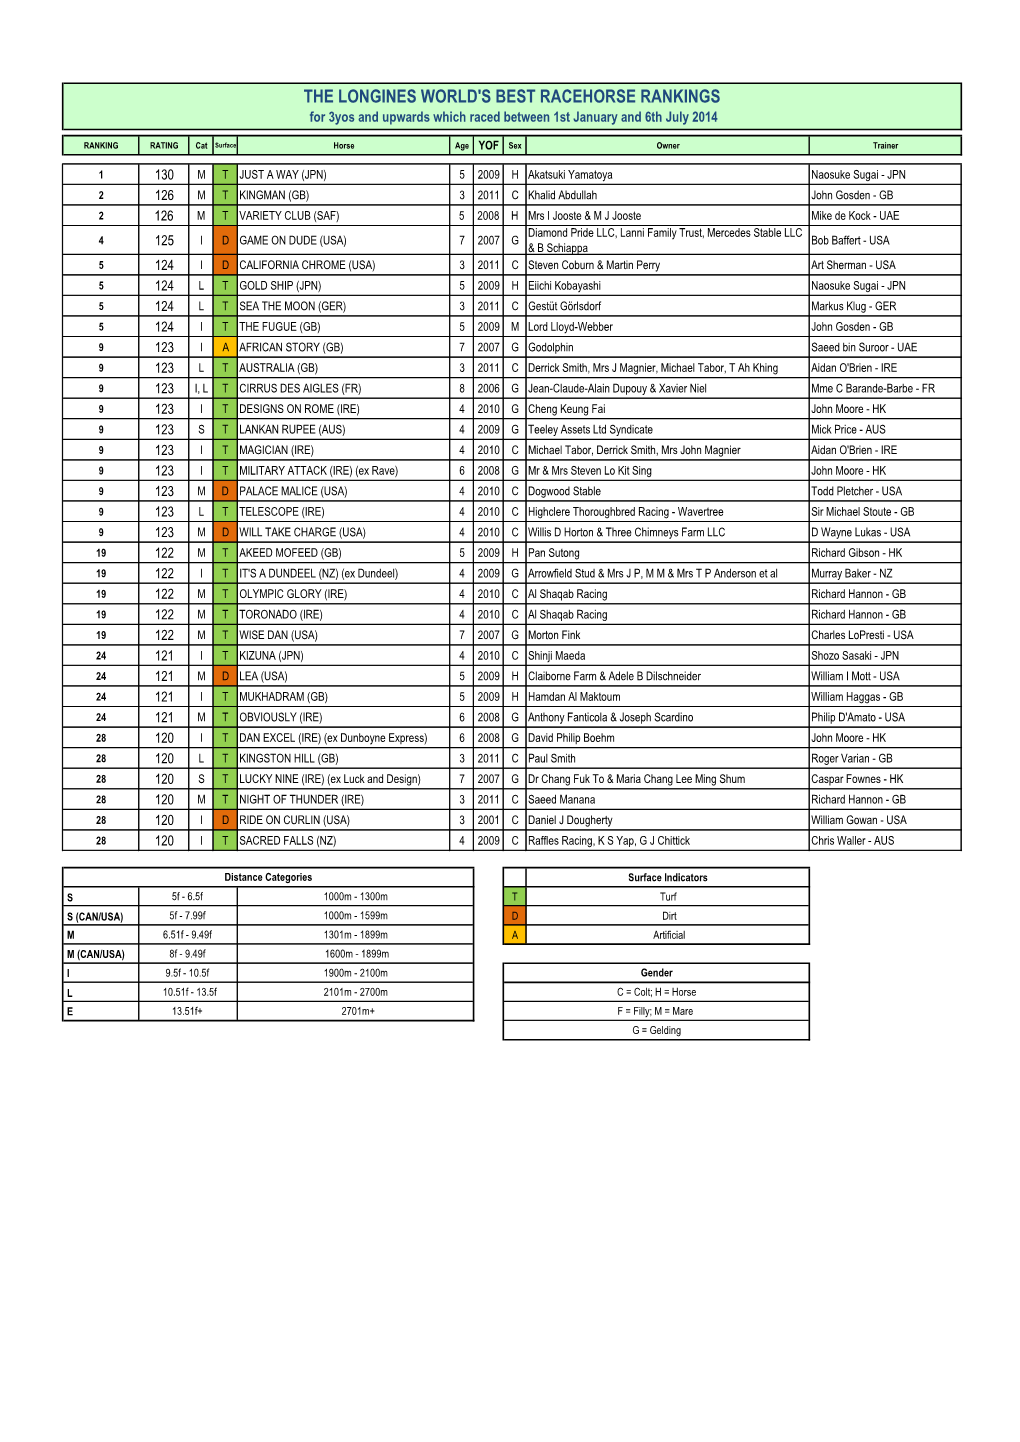 THE LONGINES WORLD's BEST RACEHORSE RANKINGS for 3Yos and Upwards Which Raced Between 1St January and 6Th July 2014